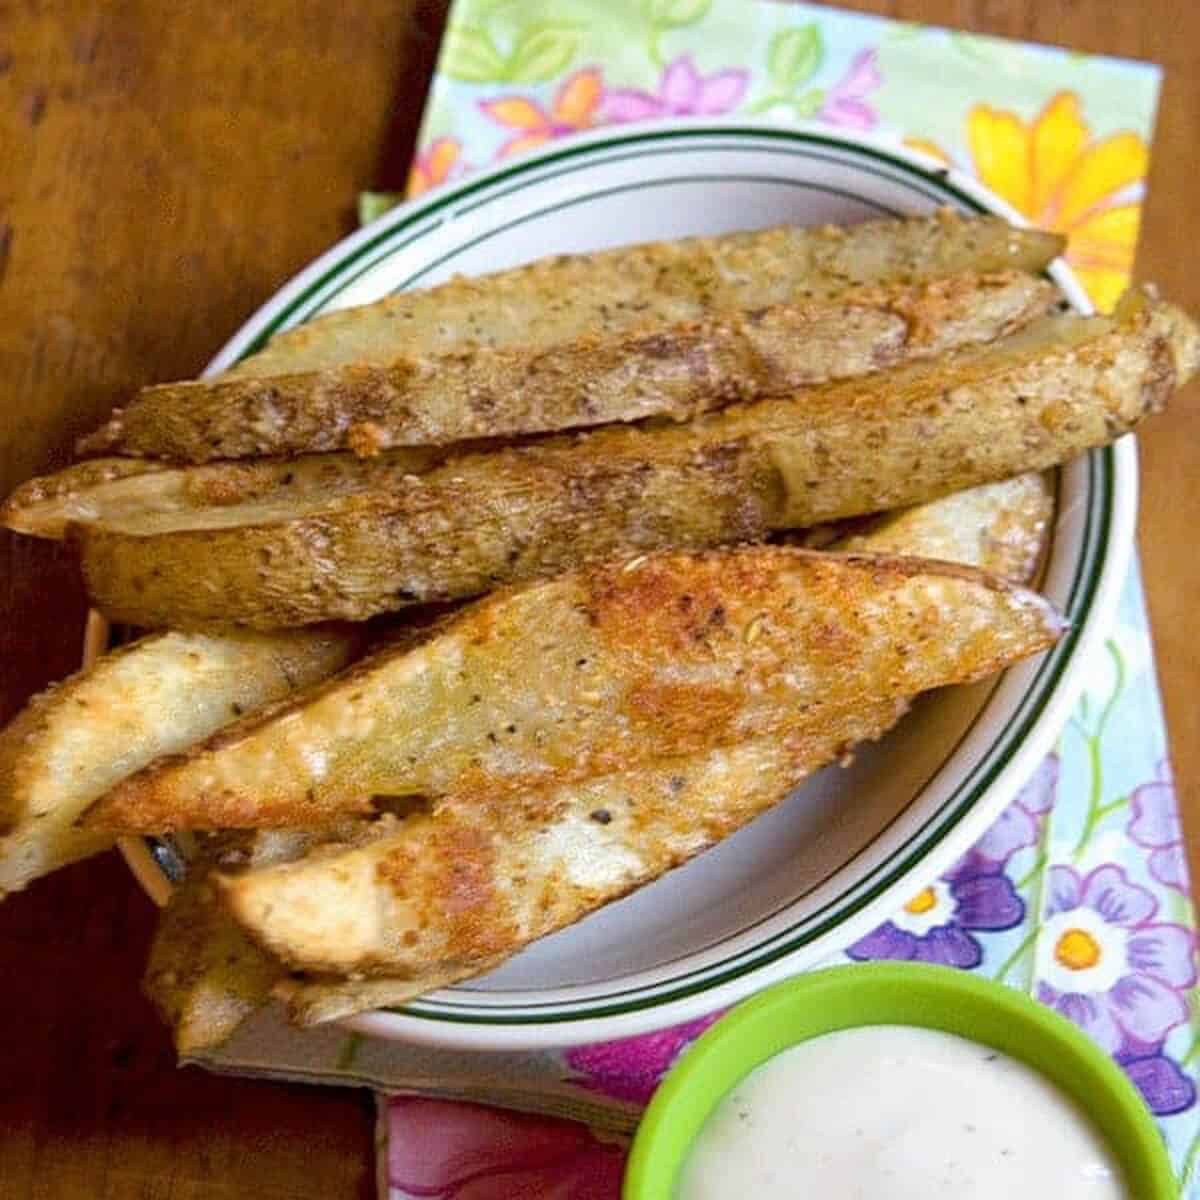 Baked potato wedges in a white dish.